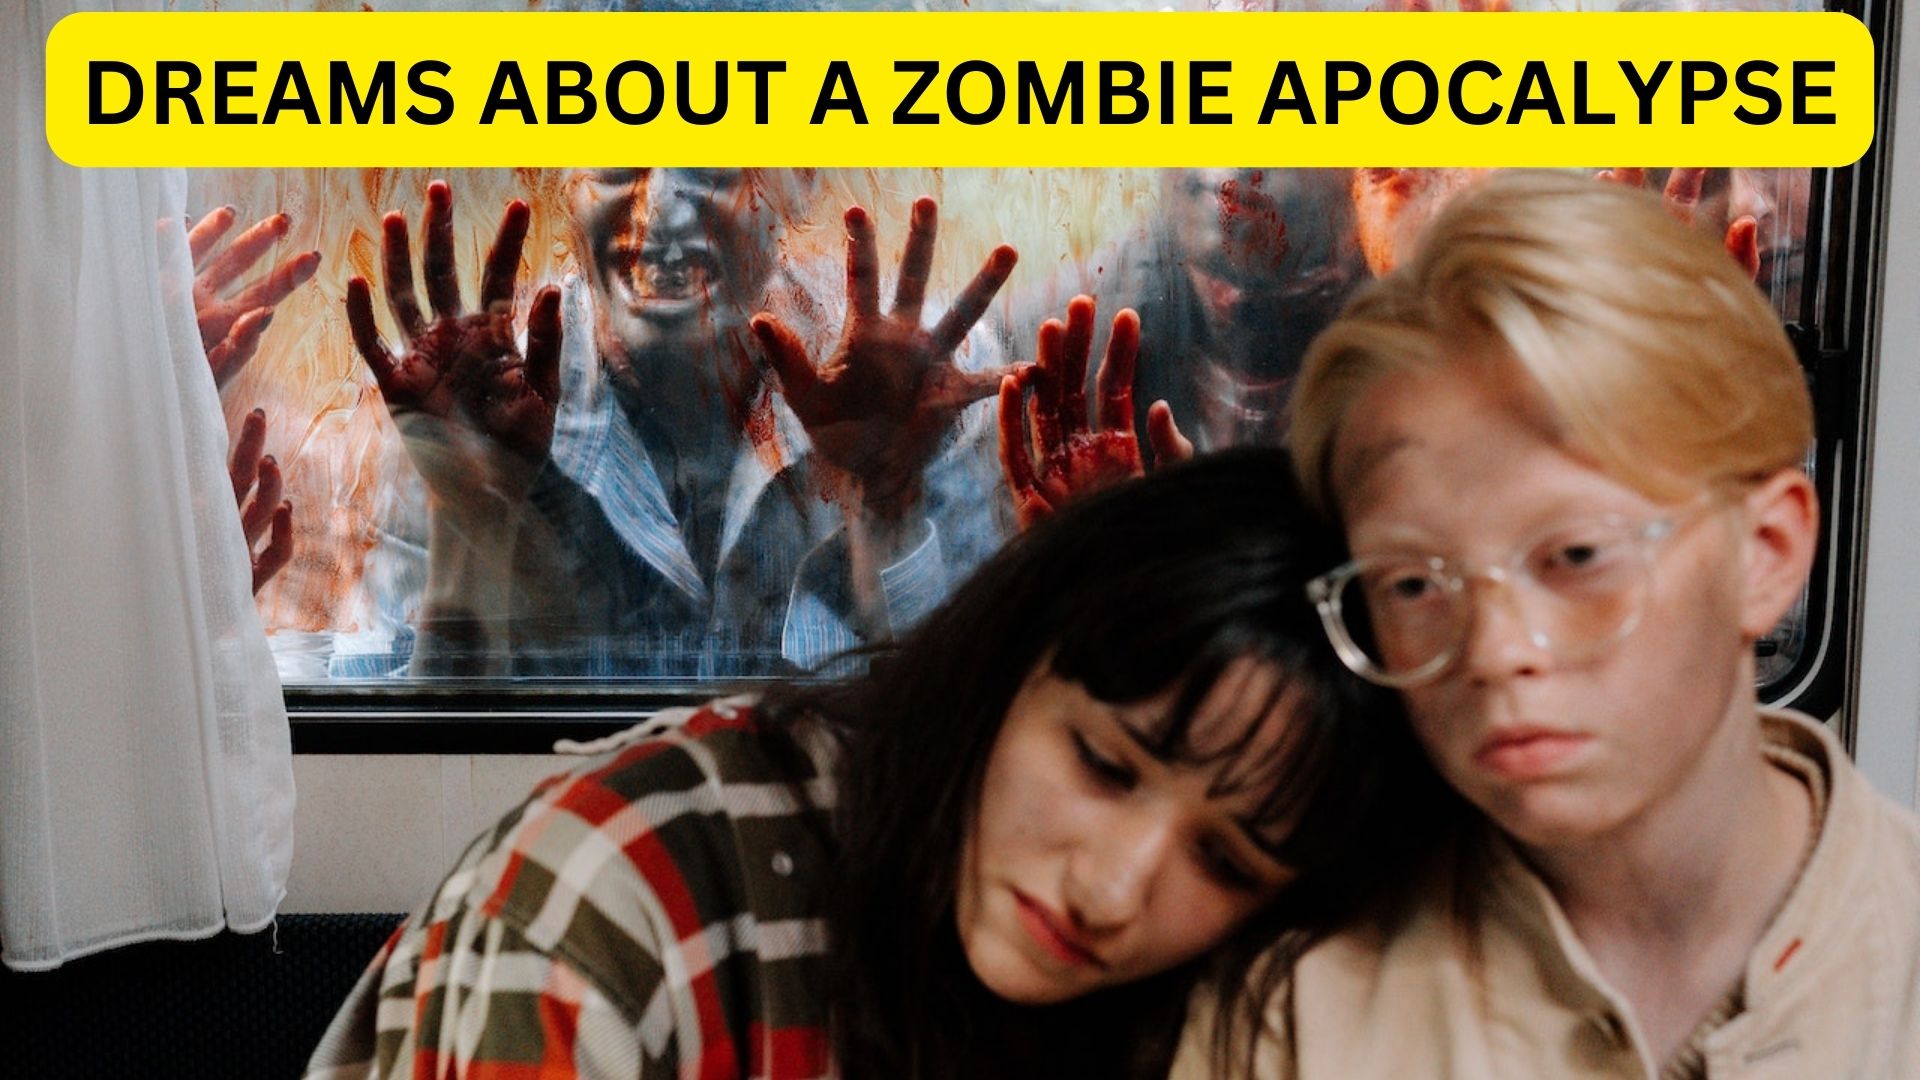 Dreams About A Zombie Apocalypse - An Overwhelming Feeling May Be Upon You